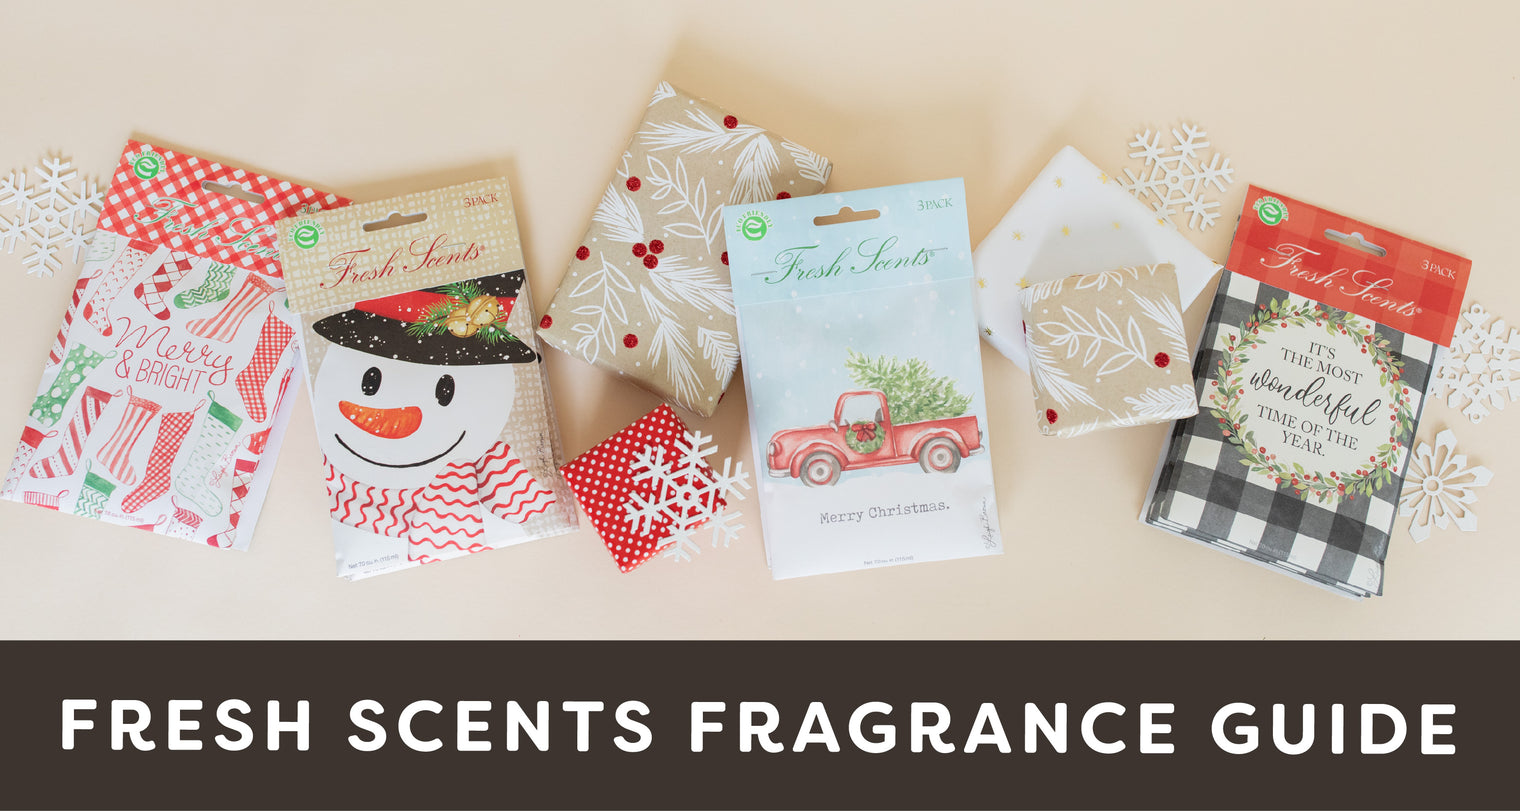 Gift by Fragrance